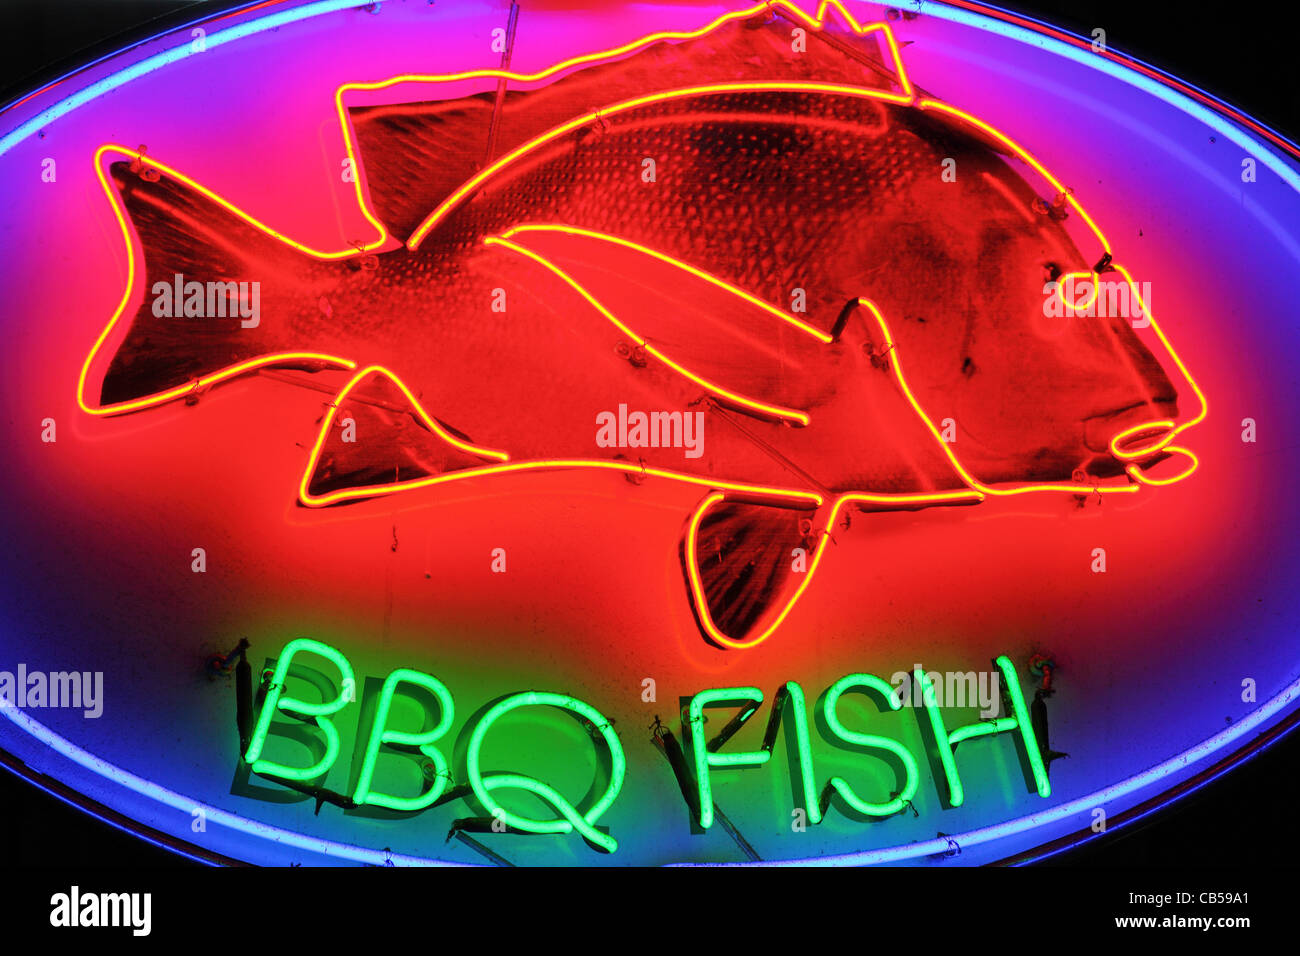 Neon BBQ fish sign at food court. Stock Photo